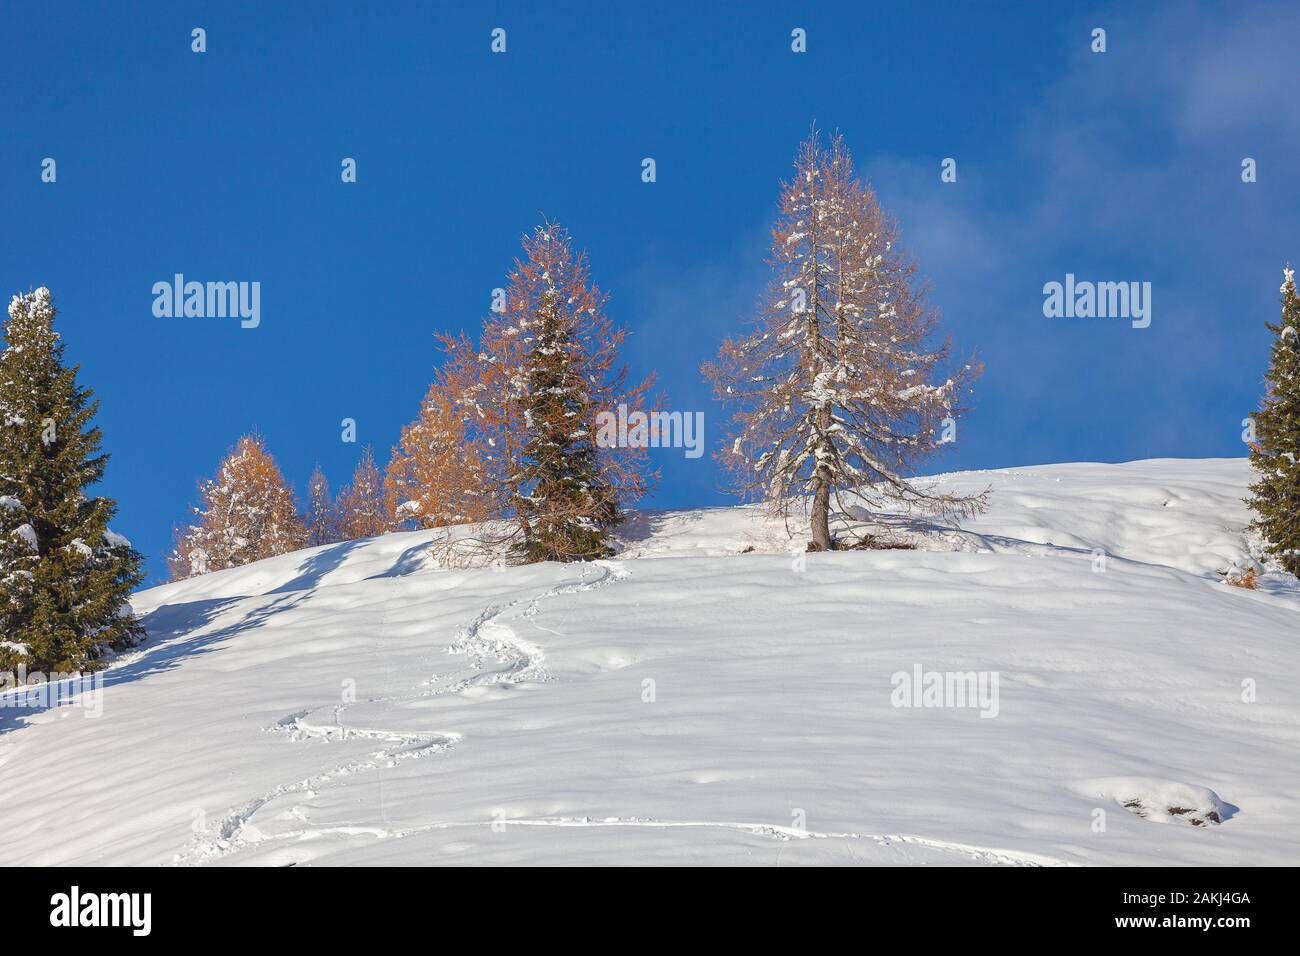 Larch trees on a snowy slope with traces of the passage of a skier Stock Photo